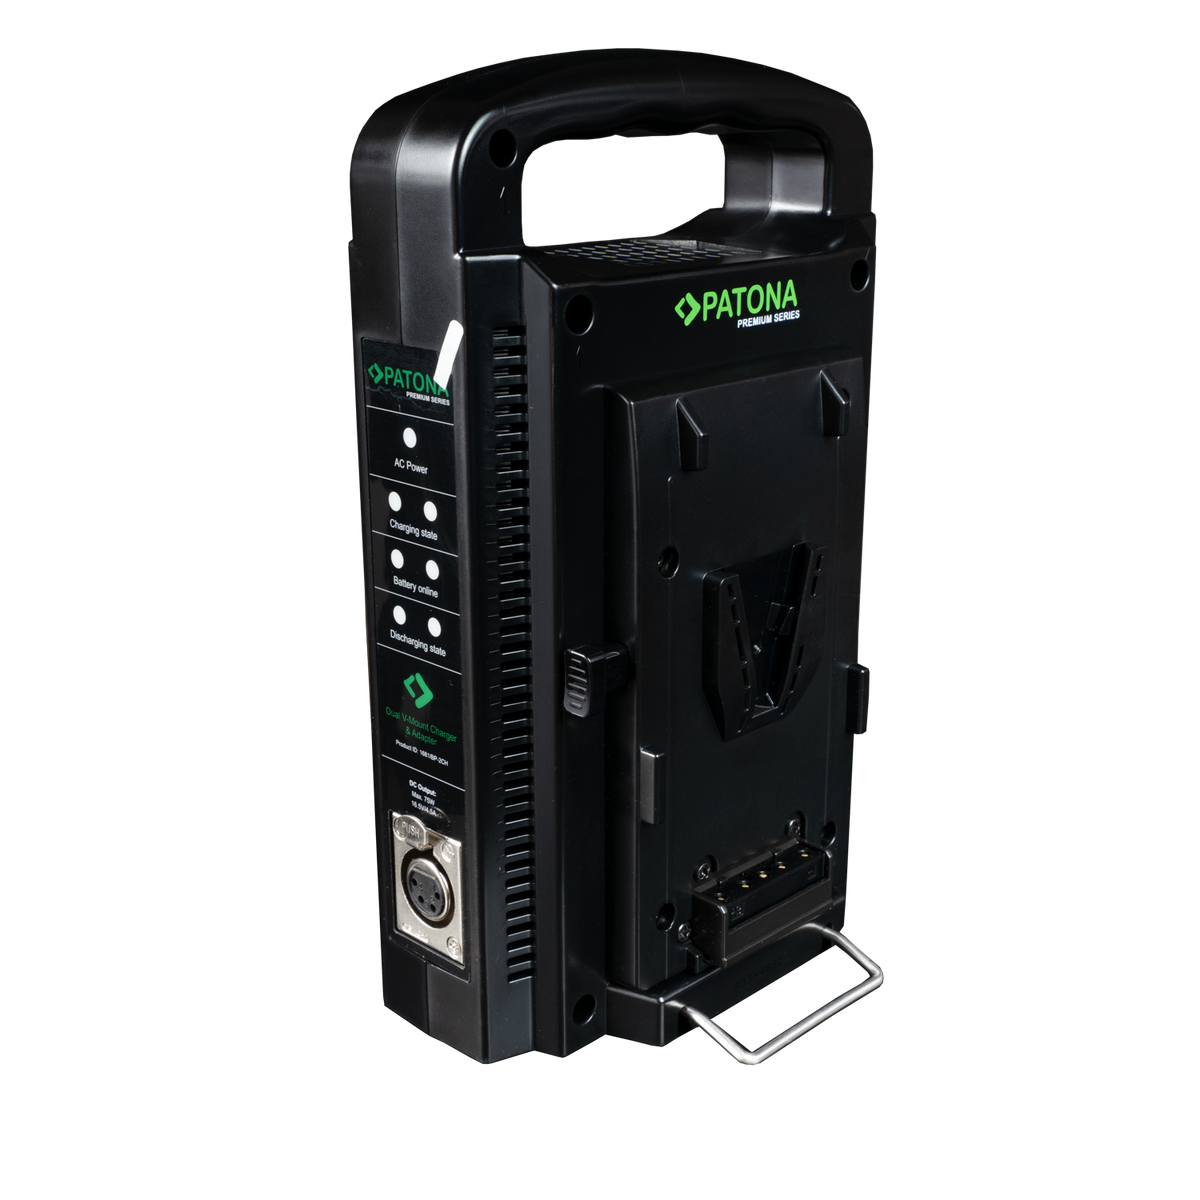 Dual V-Mount Battery Charger with XLR